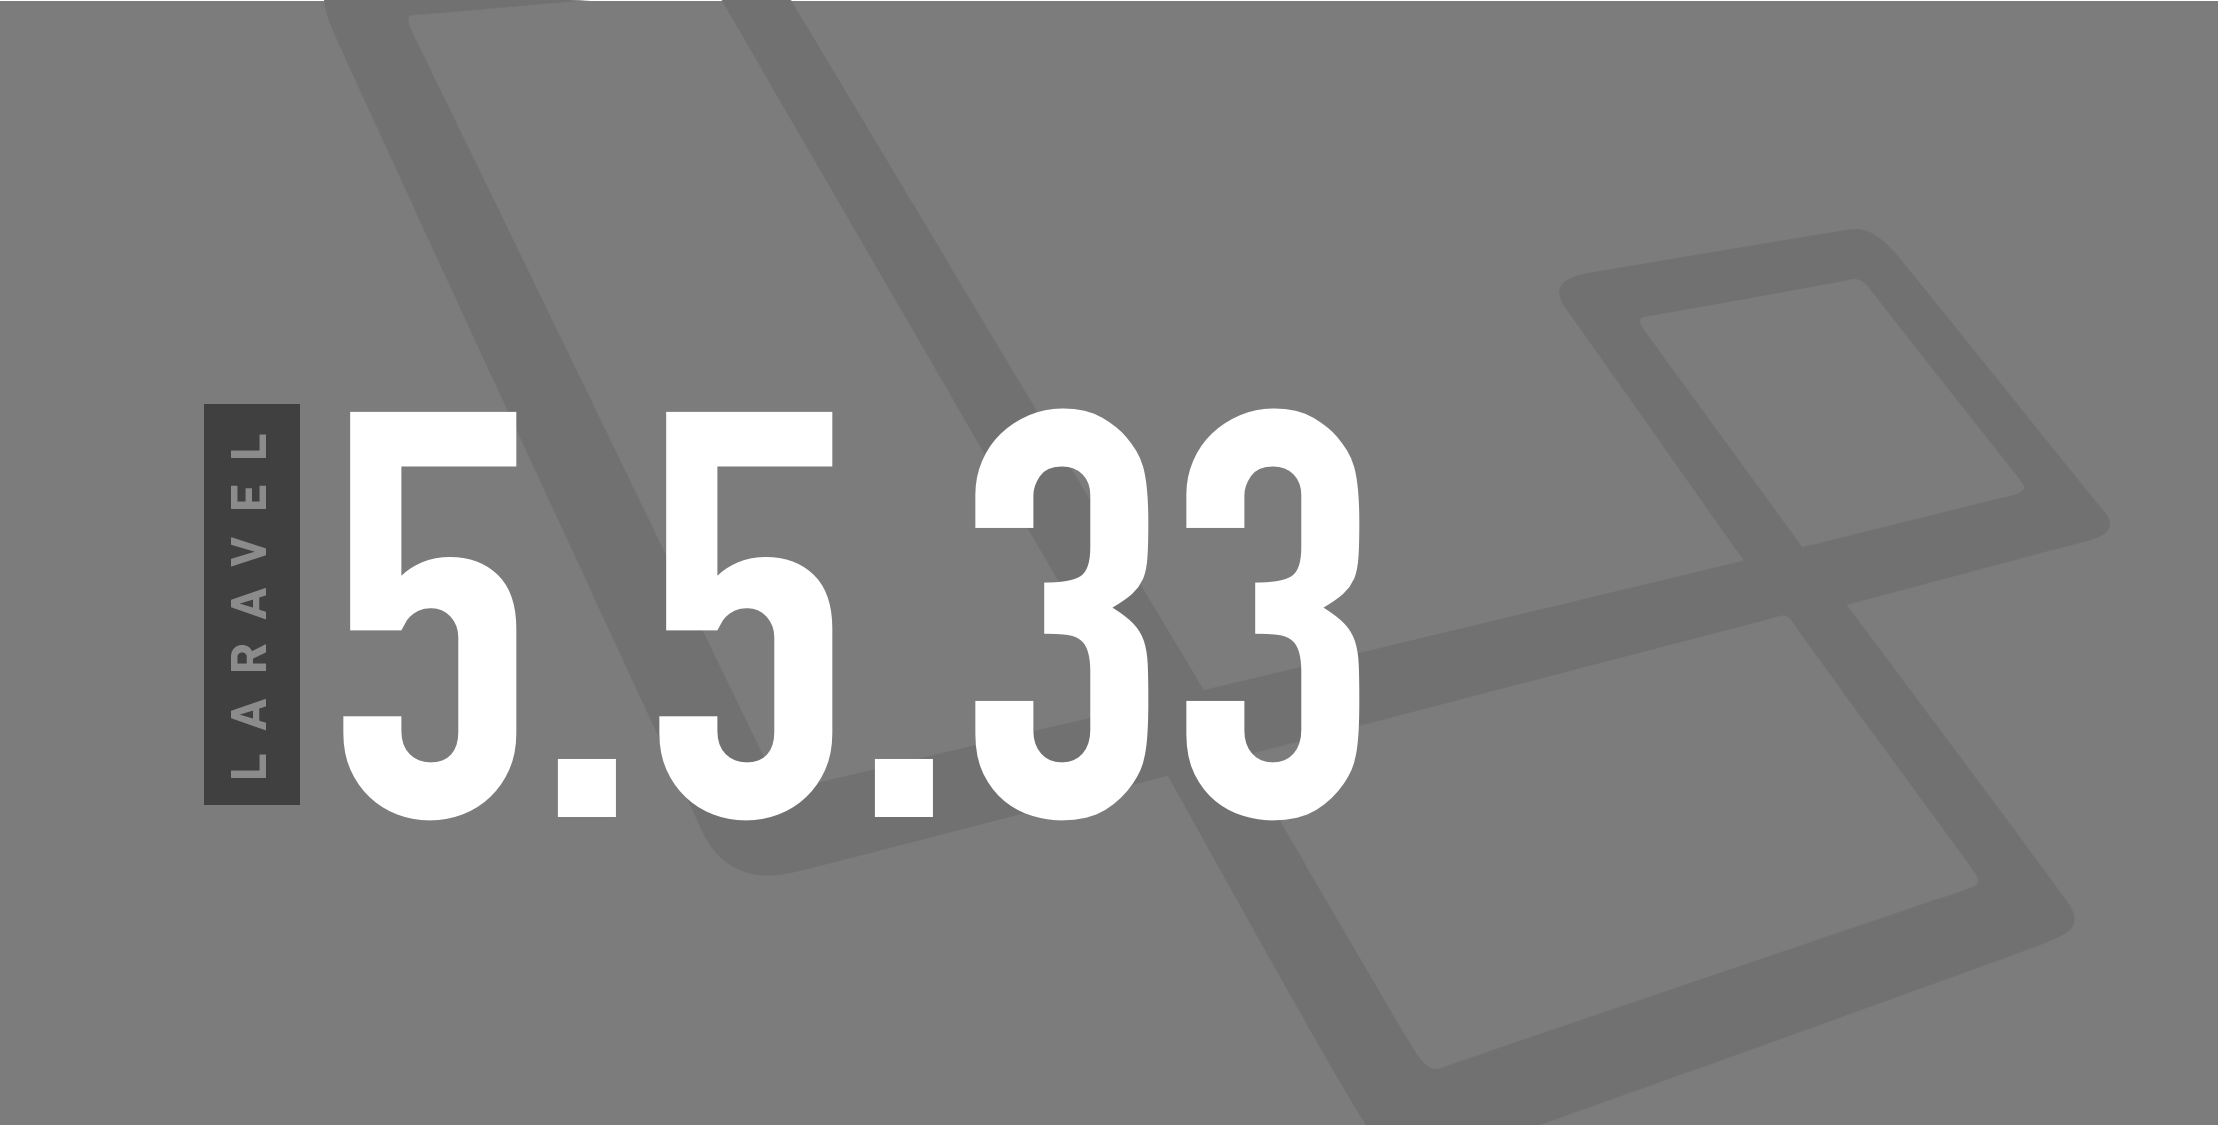 Laravel 5.5.33 Is Now Available, Learn About What’s in the New Release image